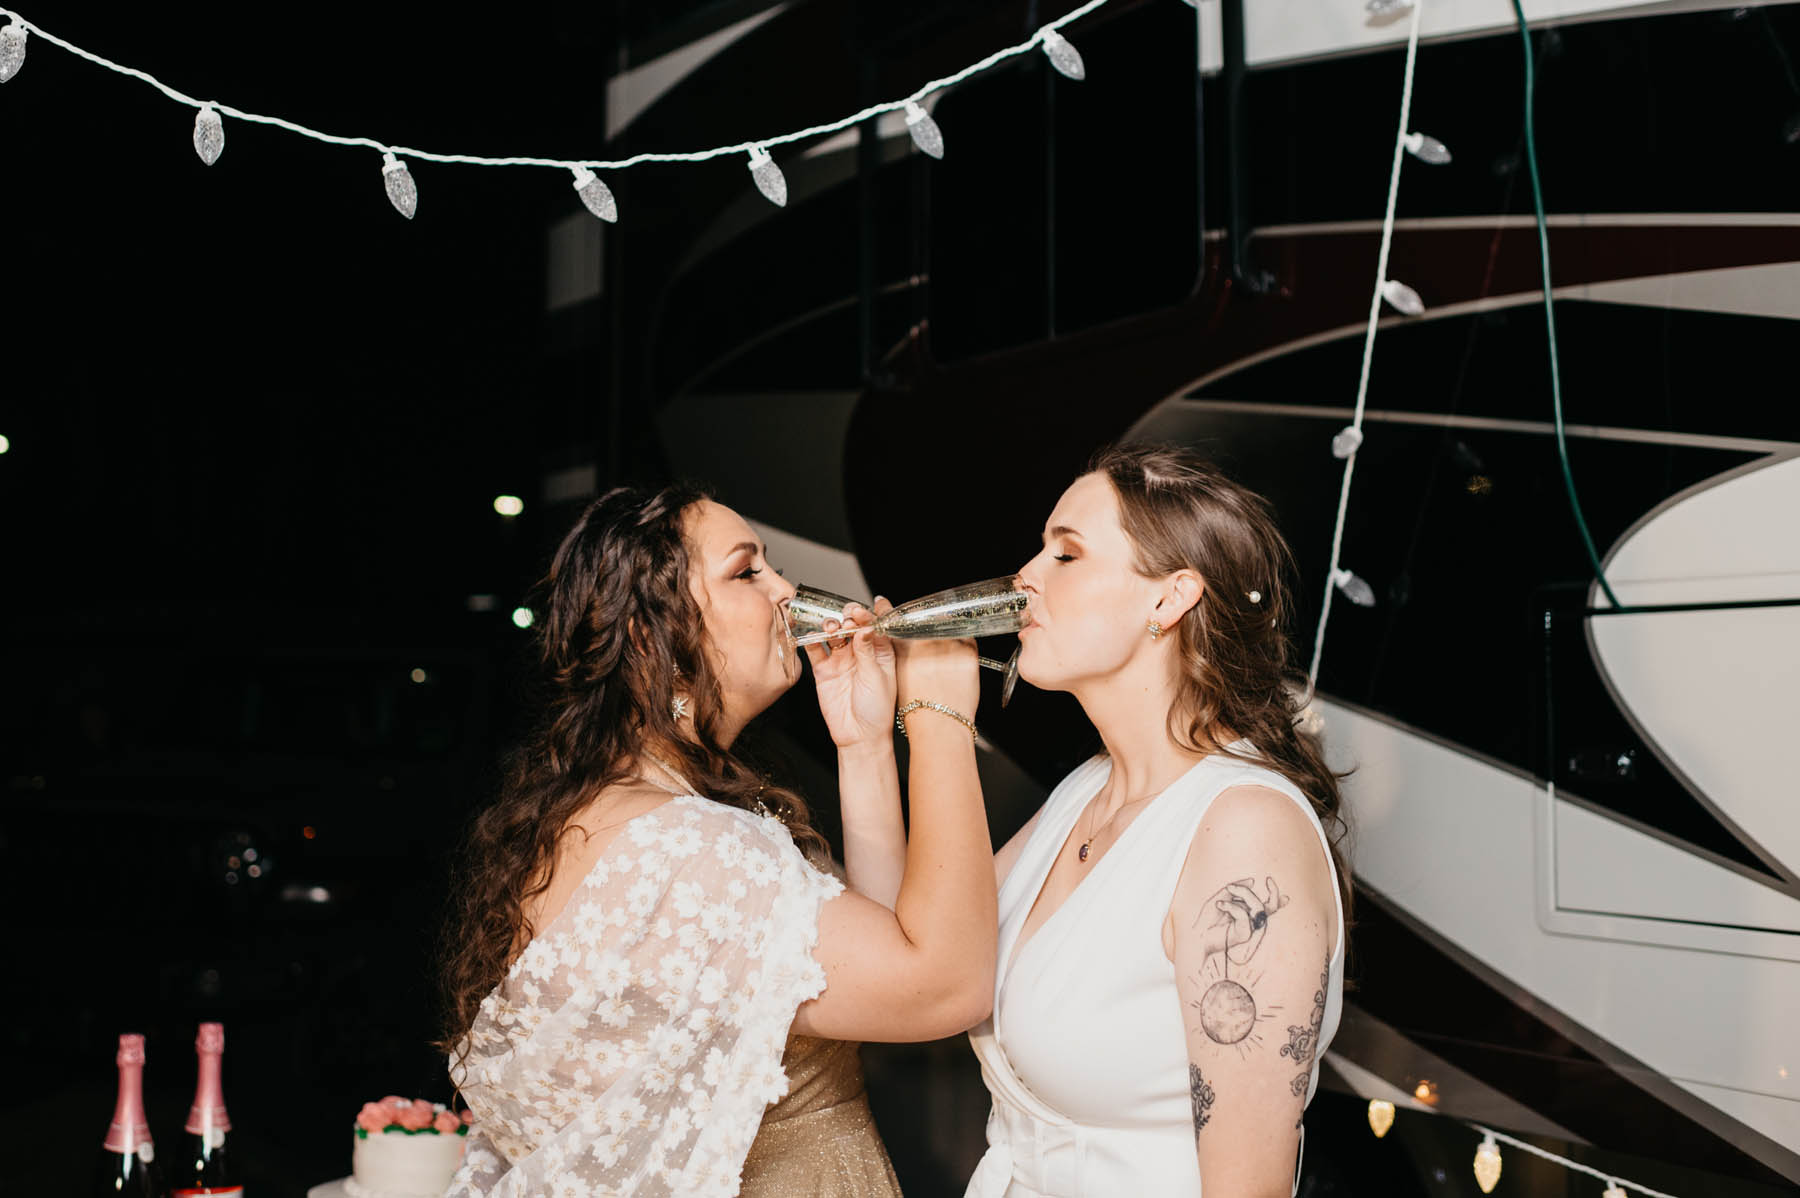 The newlyweds intertwine their arms and sip champagne in front of a black and white RV.